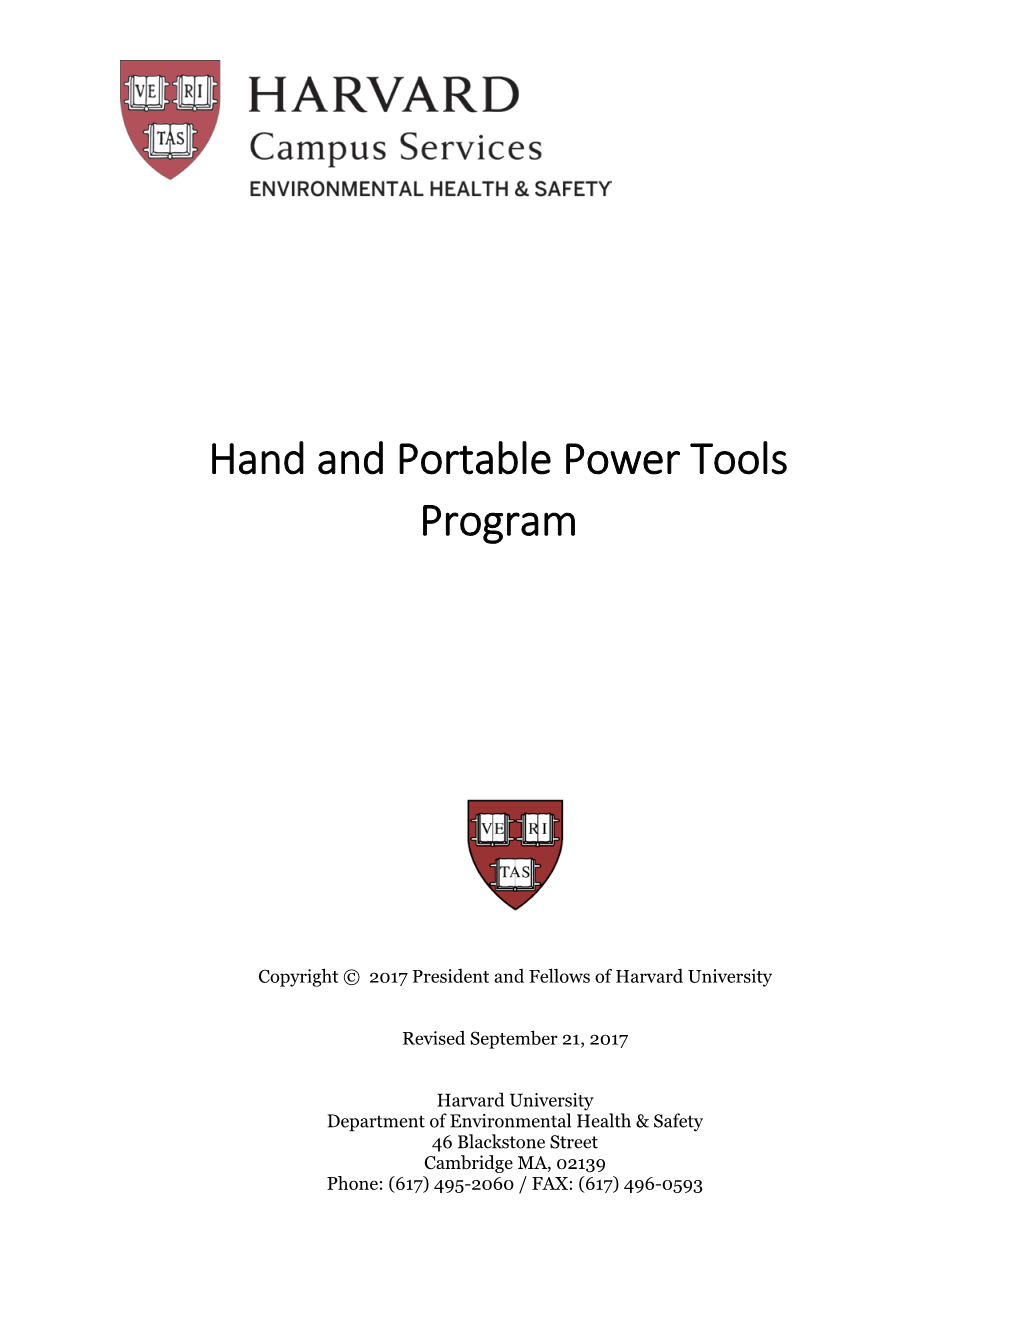 Hand and Portable Power Tools Program TABLE of CONTENTS